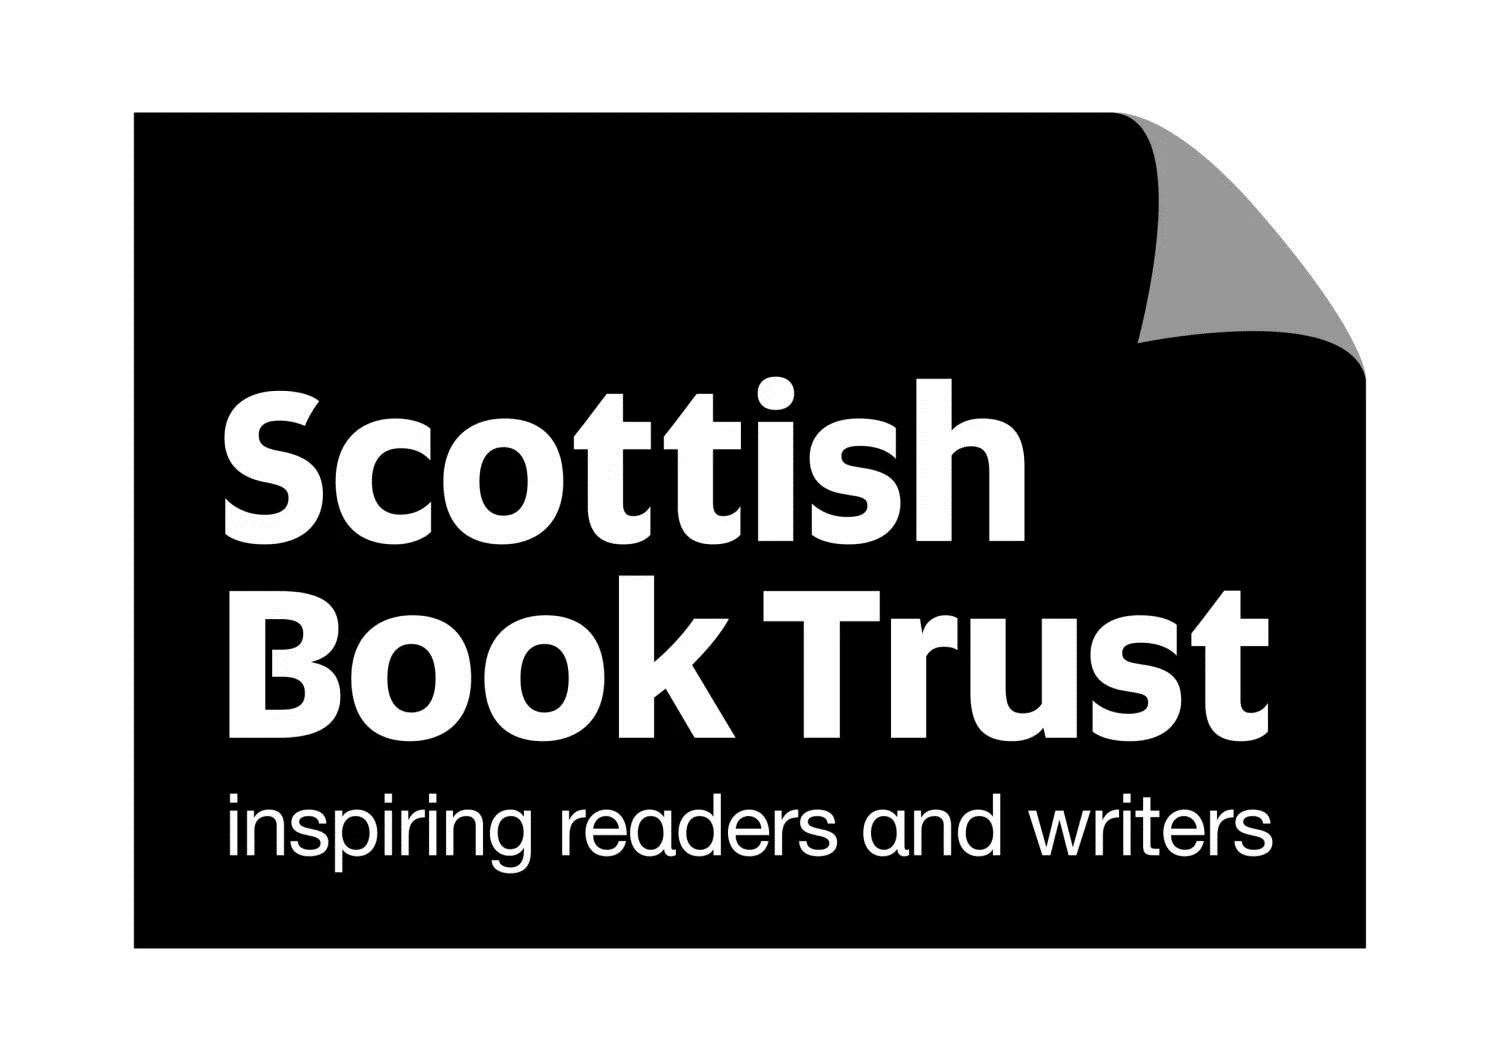 The Scottish Book Trust will support the First Minister's Reading Challenge.